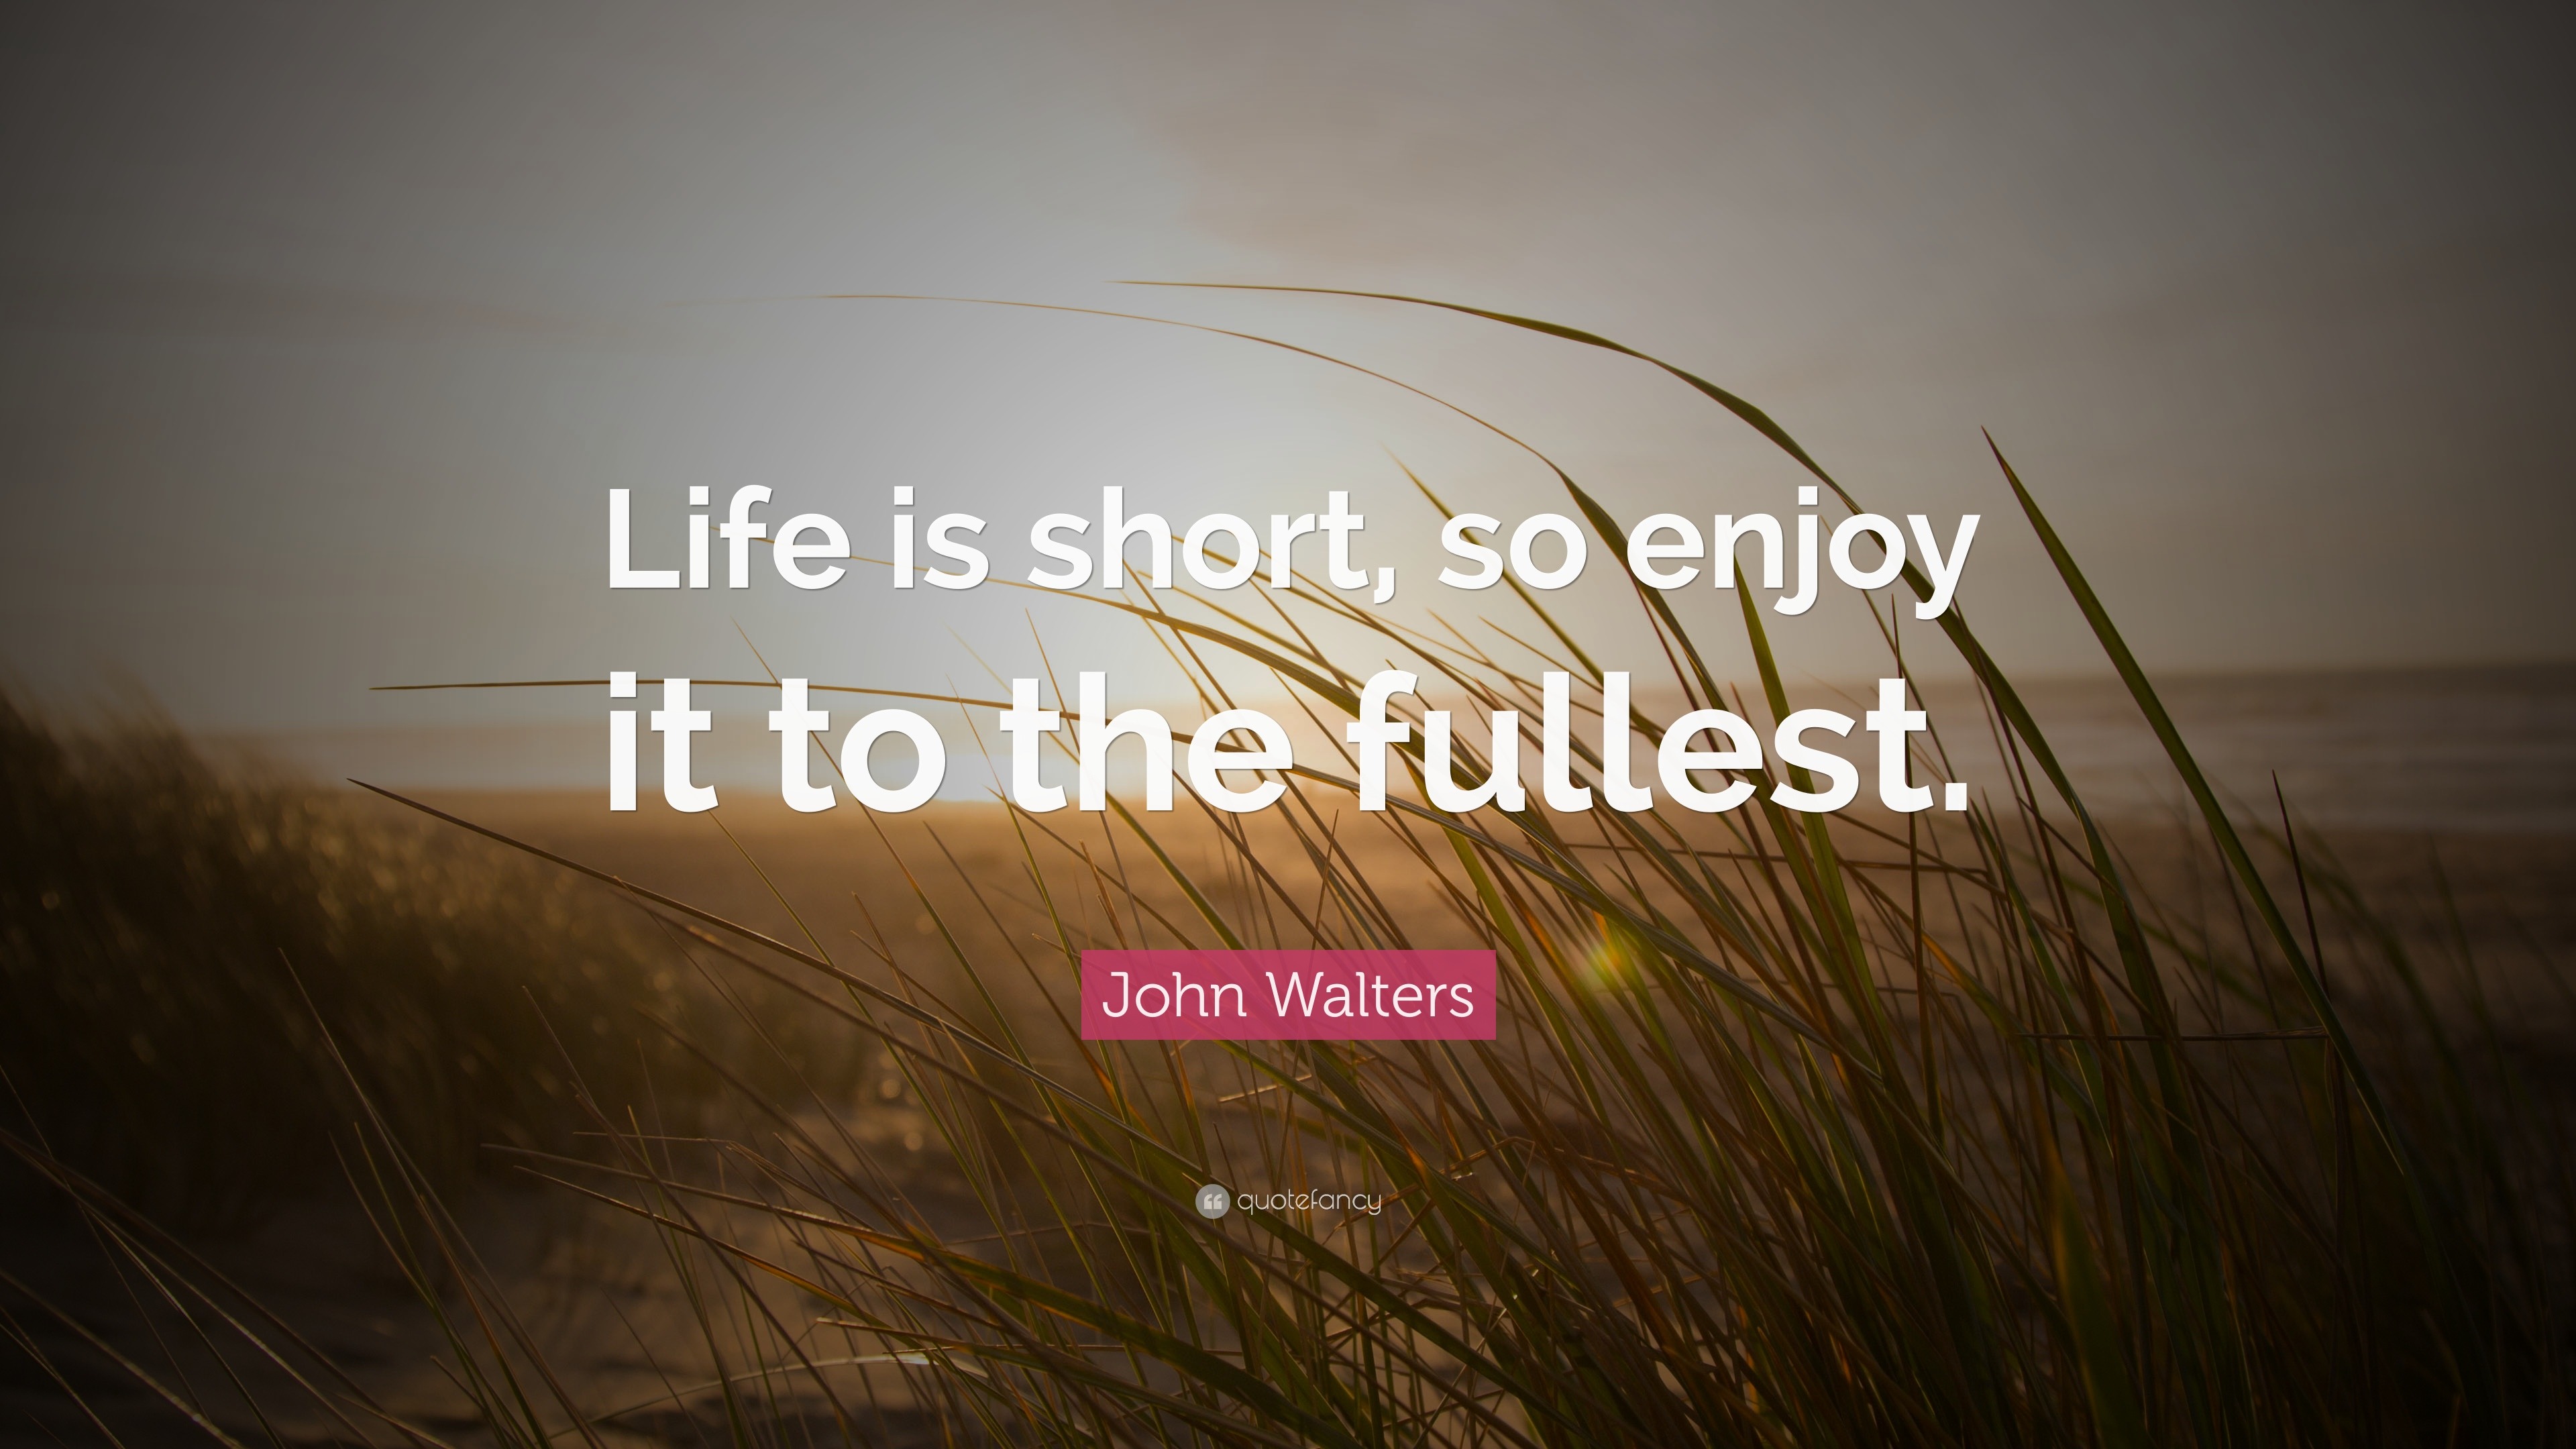 John Walters Quote “Life is short so enjoy it to the fullest